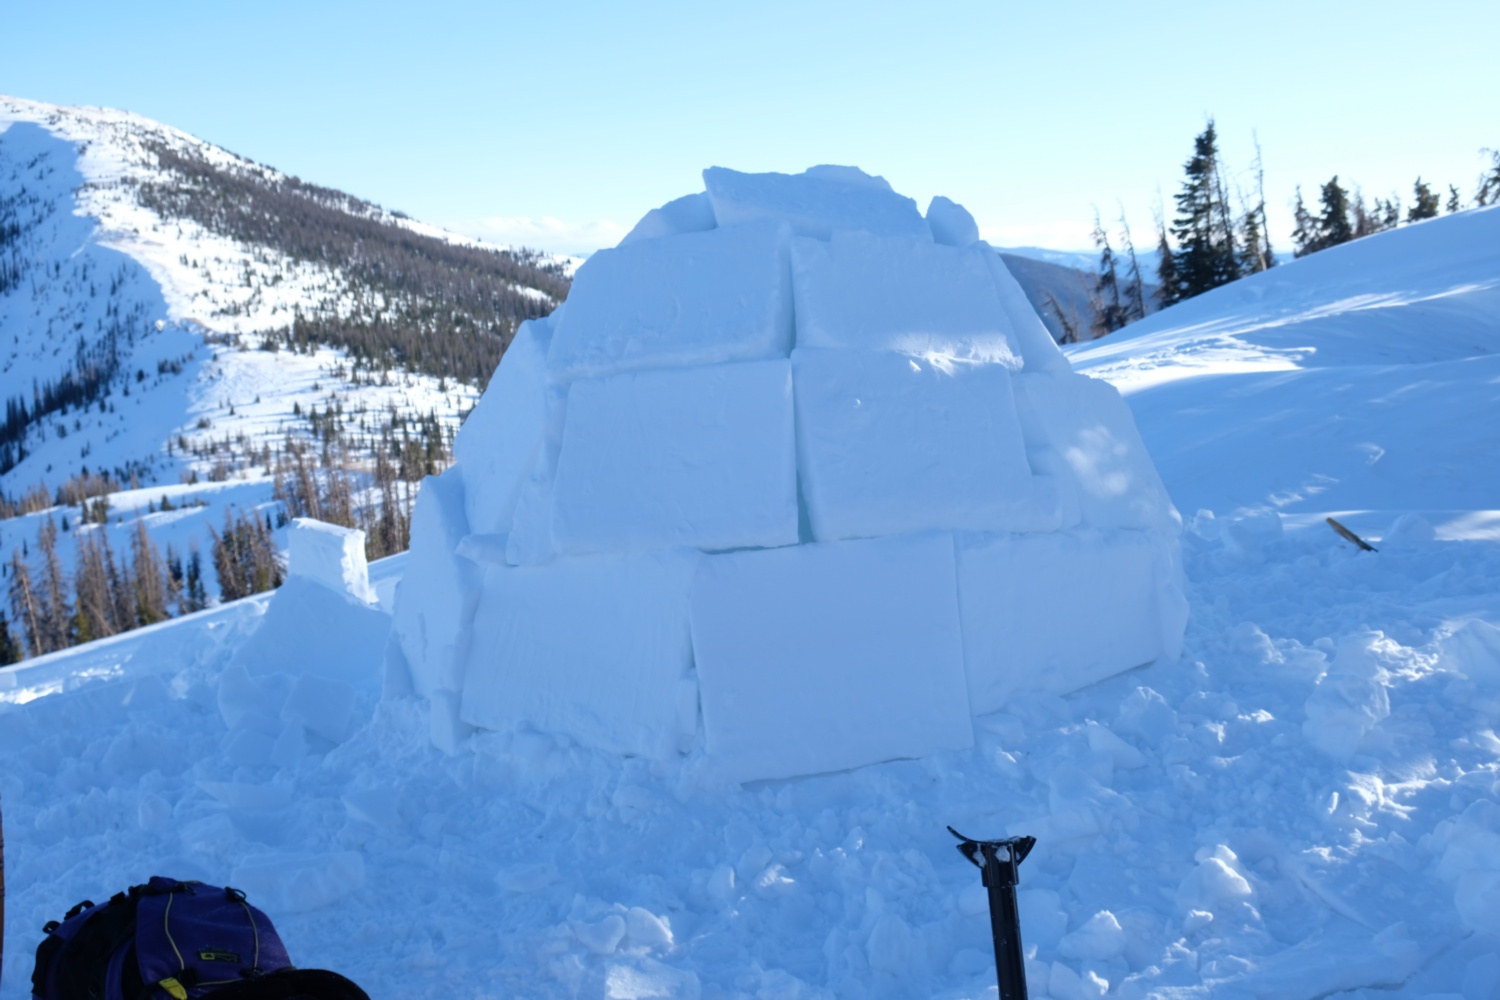 The completed igloo dome.